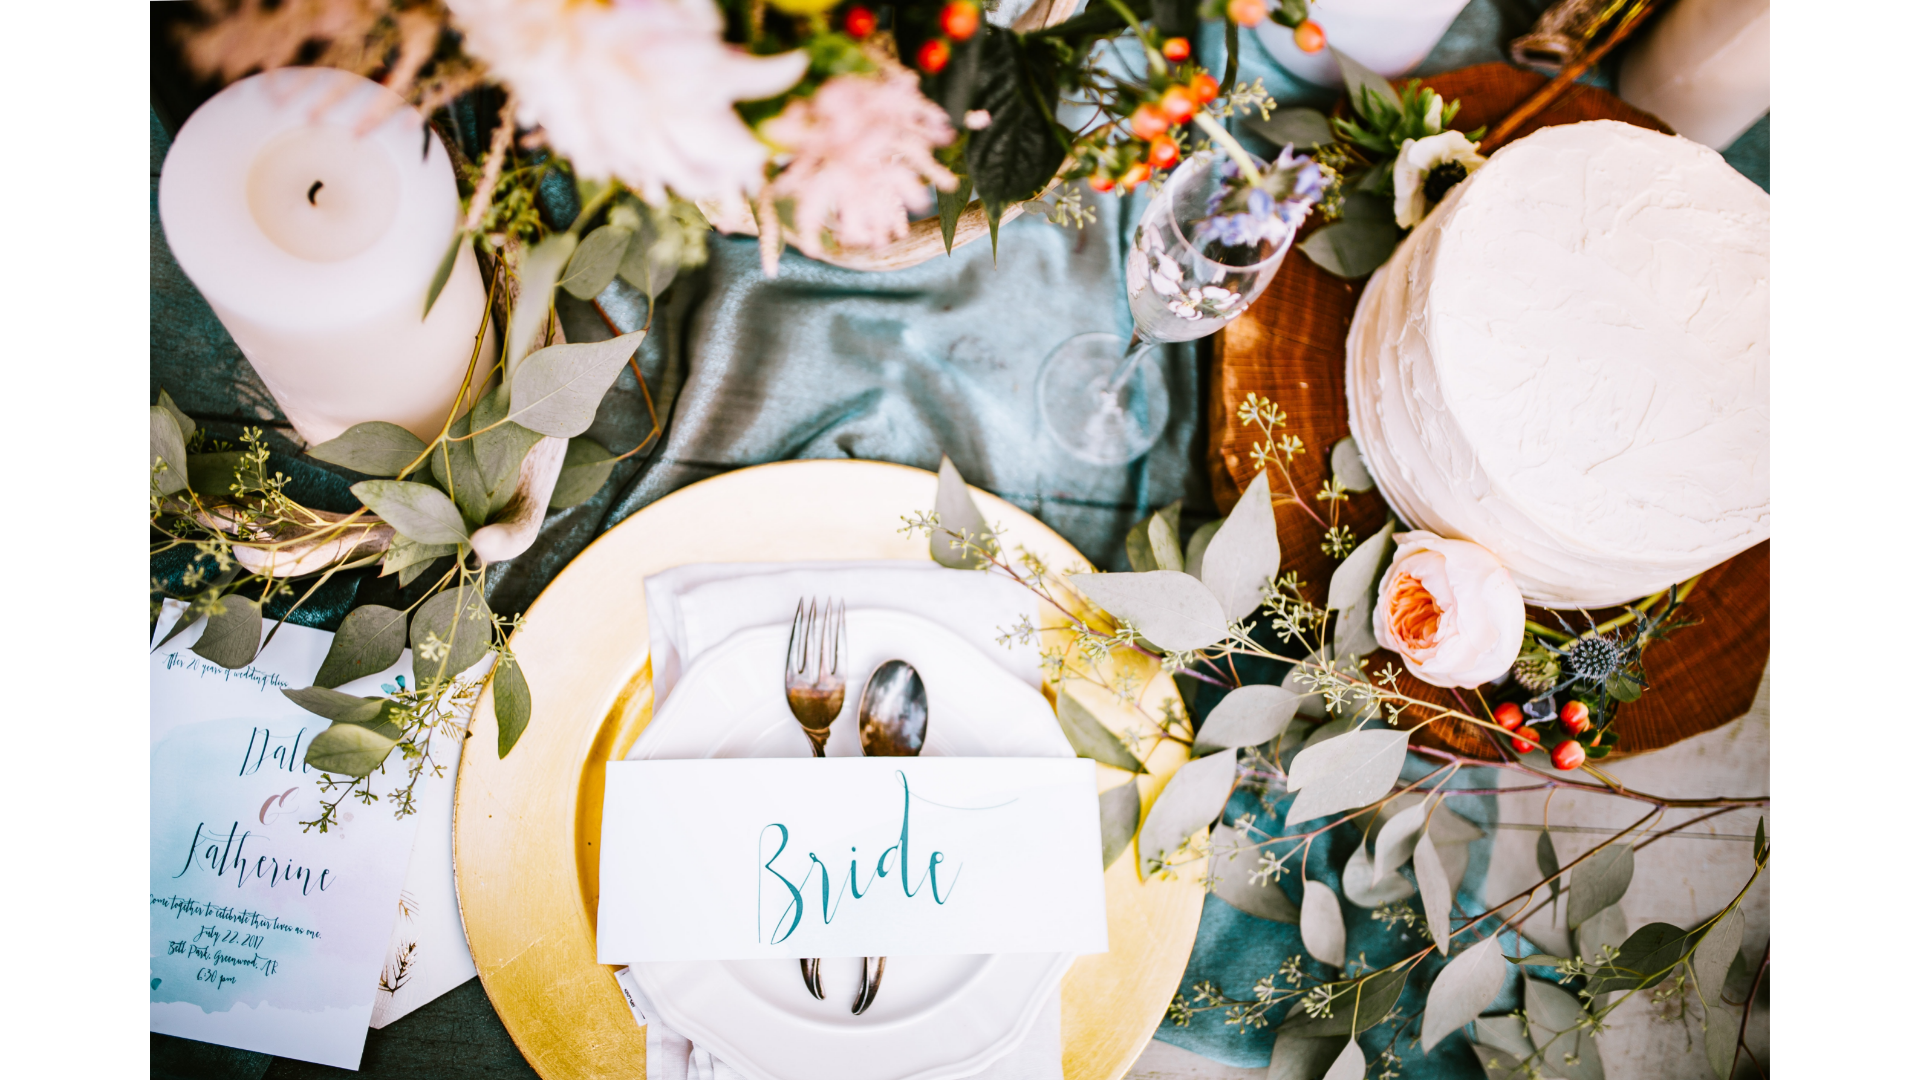 Your Wedding Seating Chart: How to Plan Who Should Sit Where